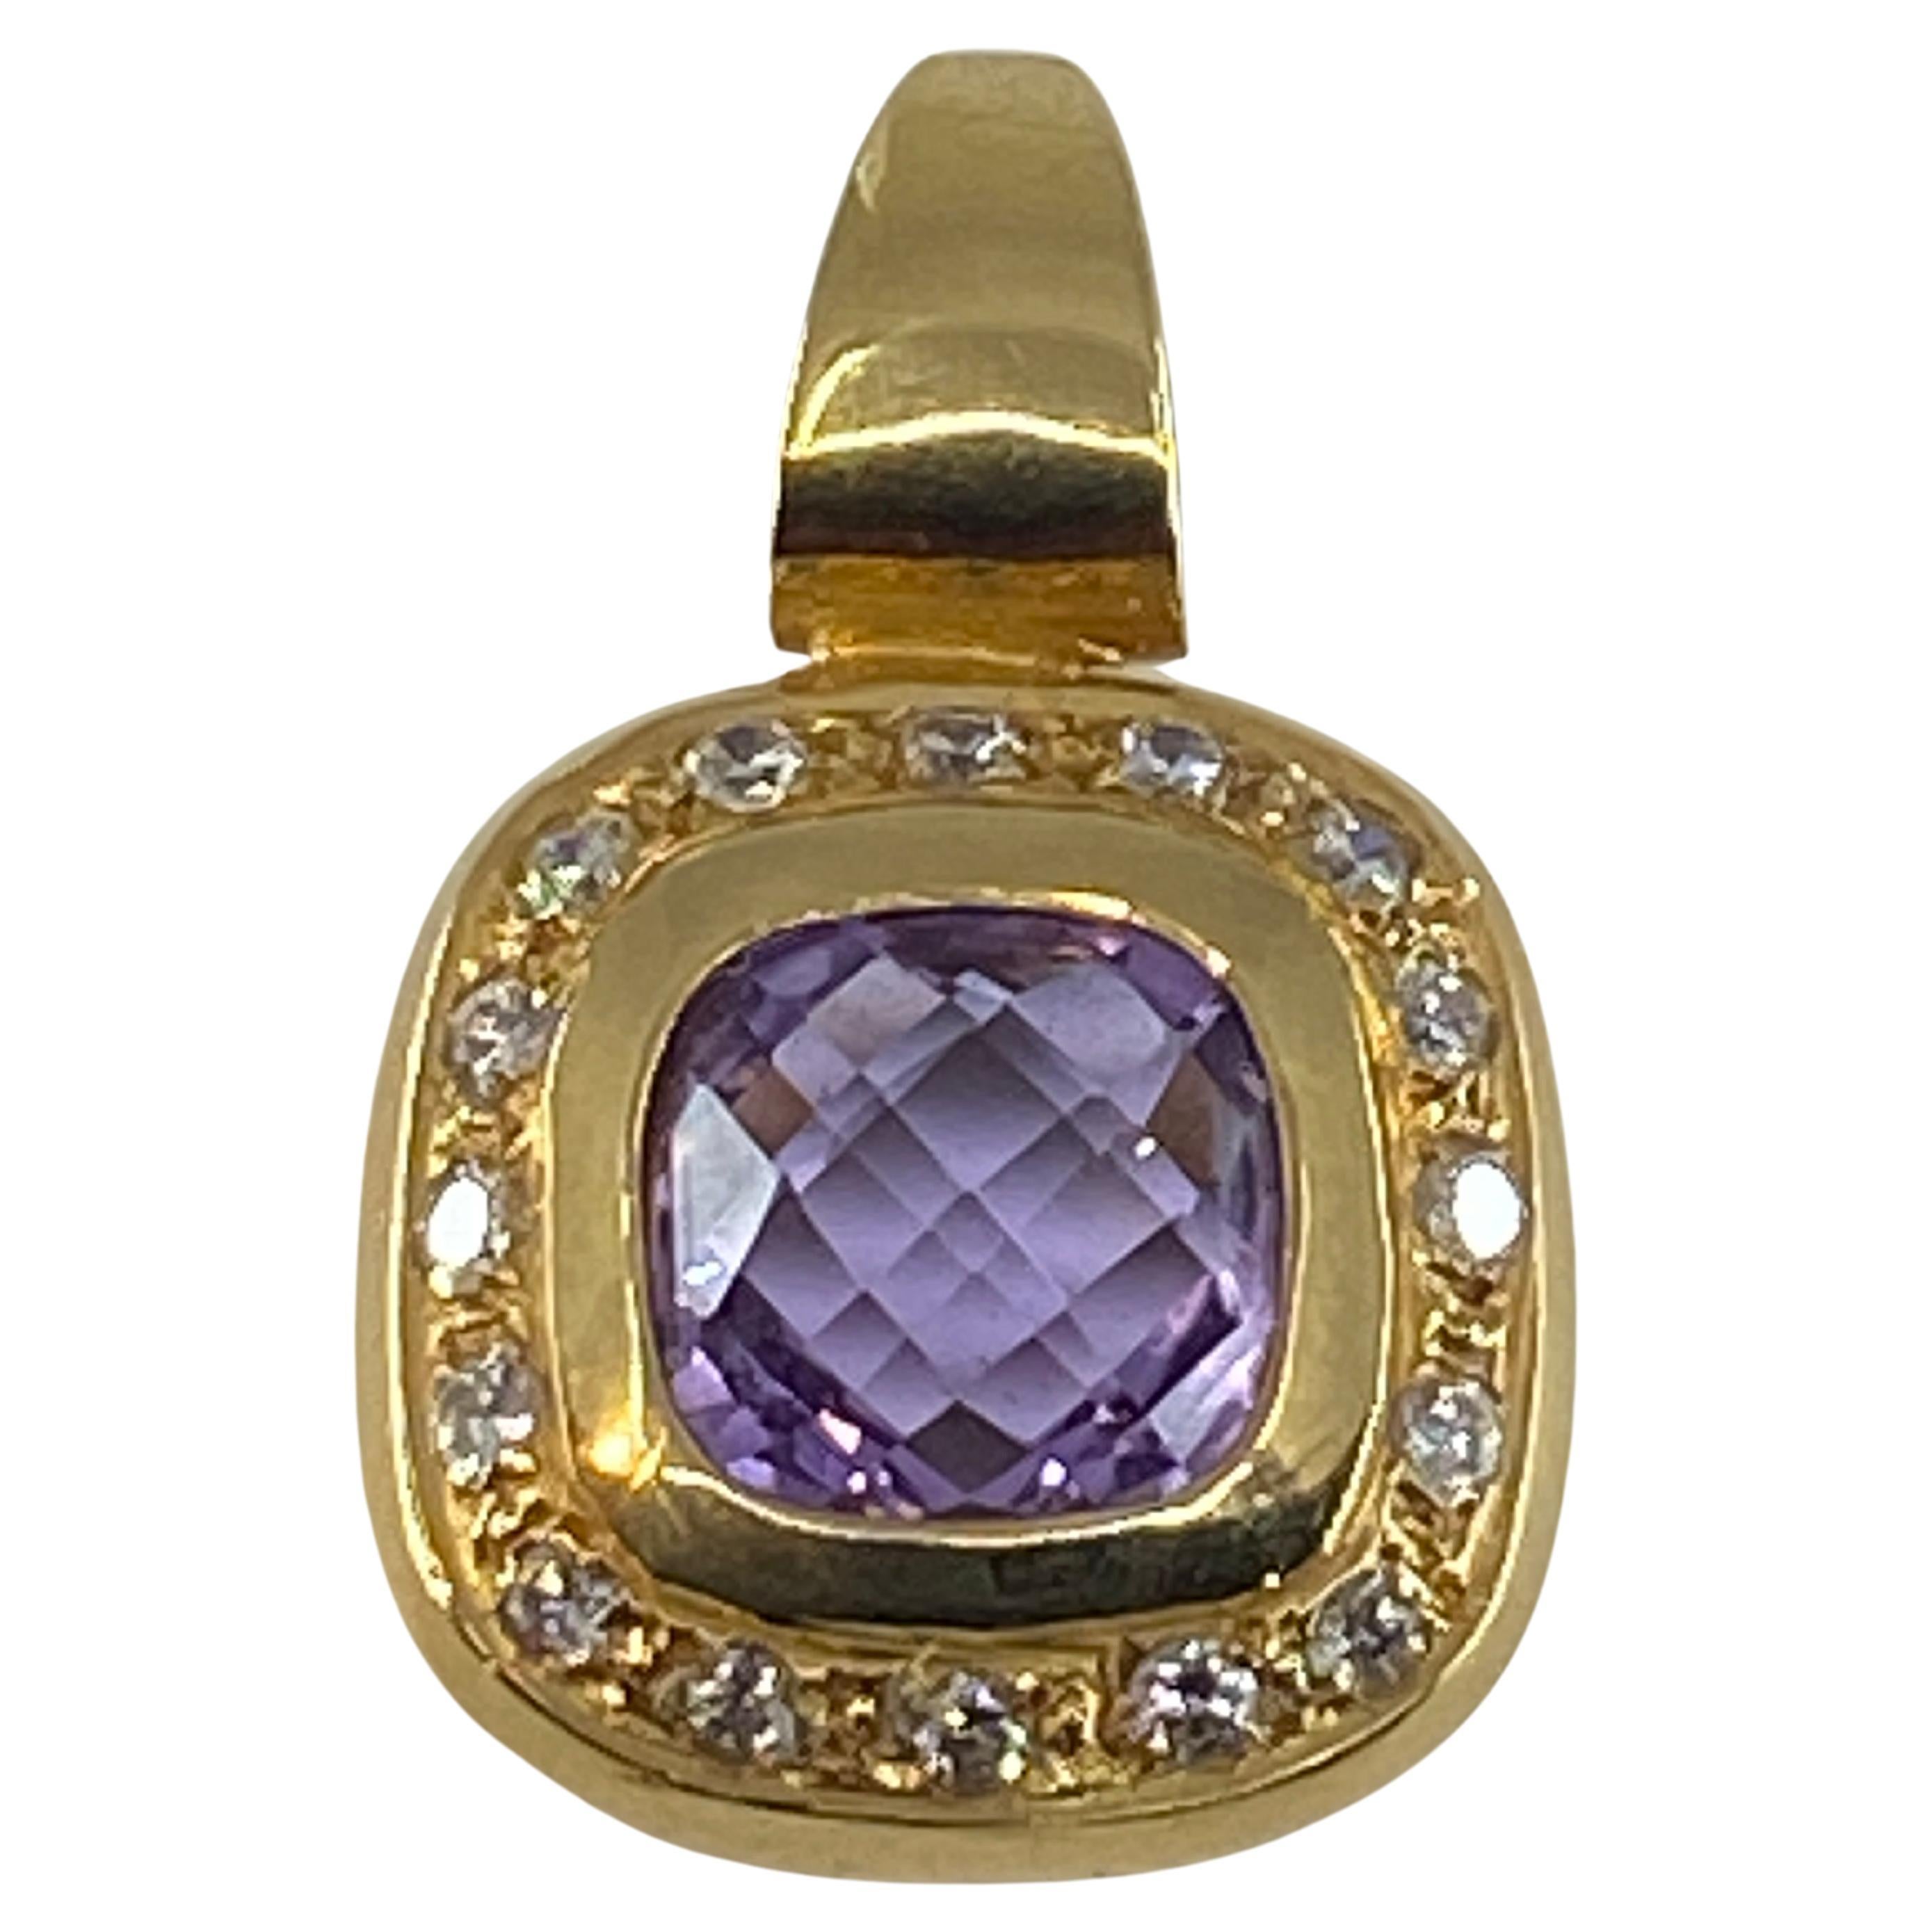 18 Carat Gold Pendant Set with a Faceted Améthyst and Diamonds